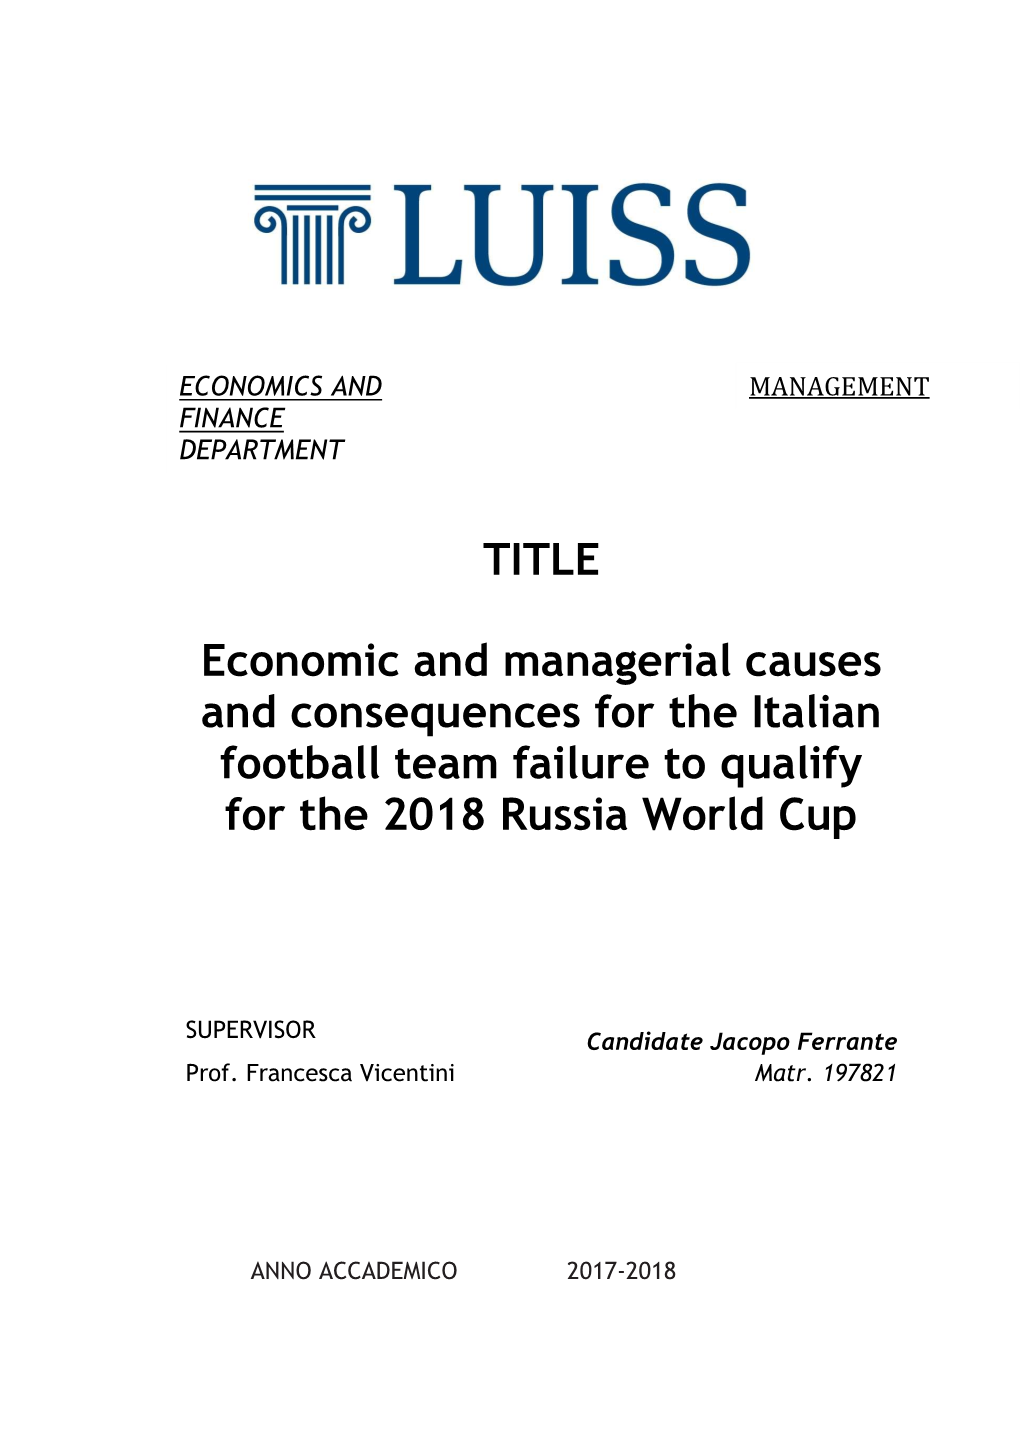 TITLE Economic and Managerial Causes and Consequences for the Italian Football Team Failure to Qualify for the 2018 Russia World